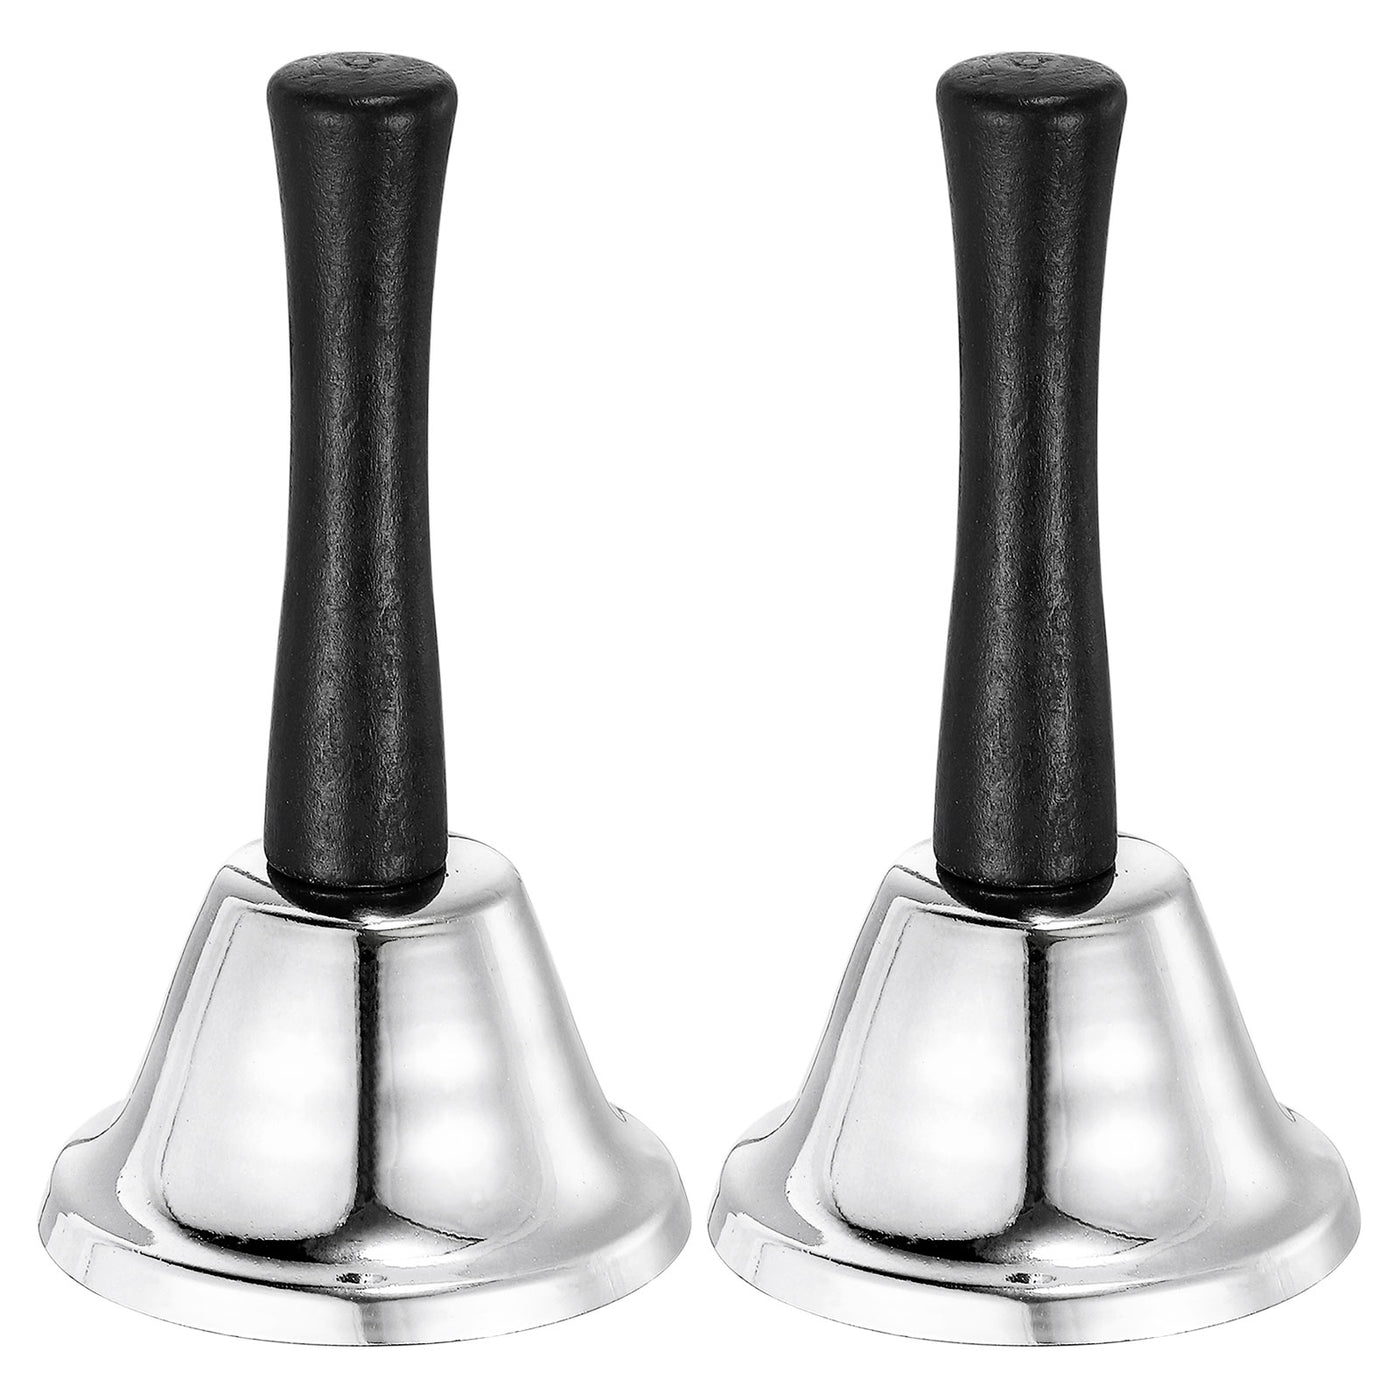 Uxcell Uxcell Loud Hand Bell, 2pcs 65mm(2.56") Dinner Bell for Classroom, Service, Silver Tone